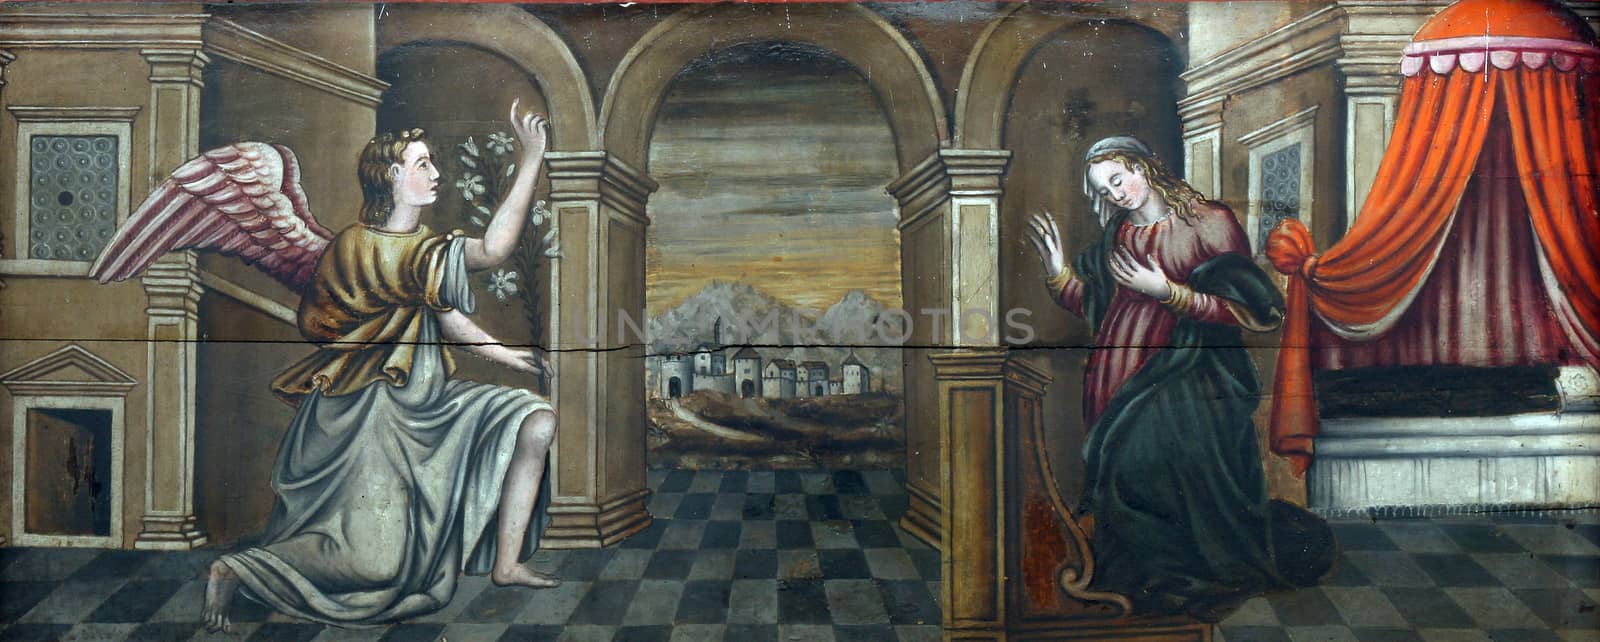 The Annunciation by atlas